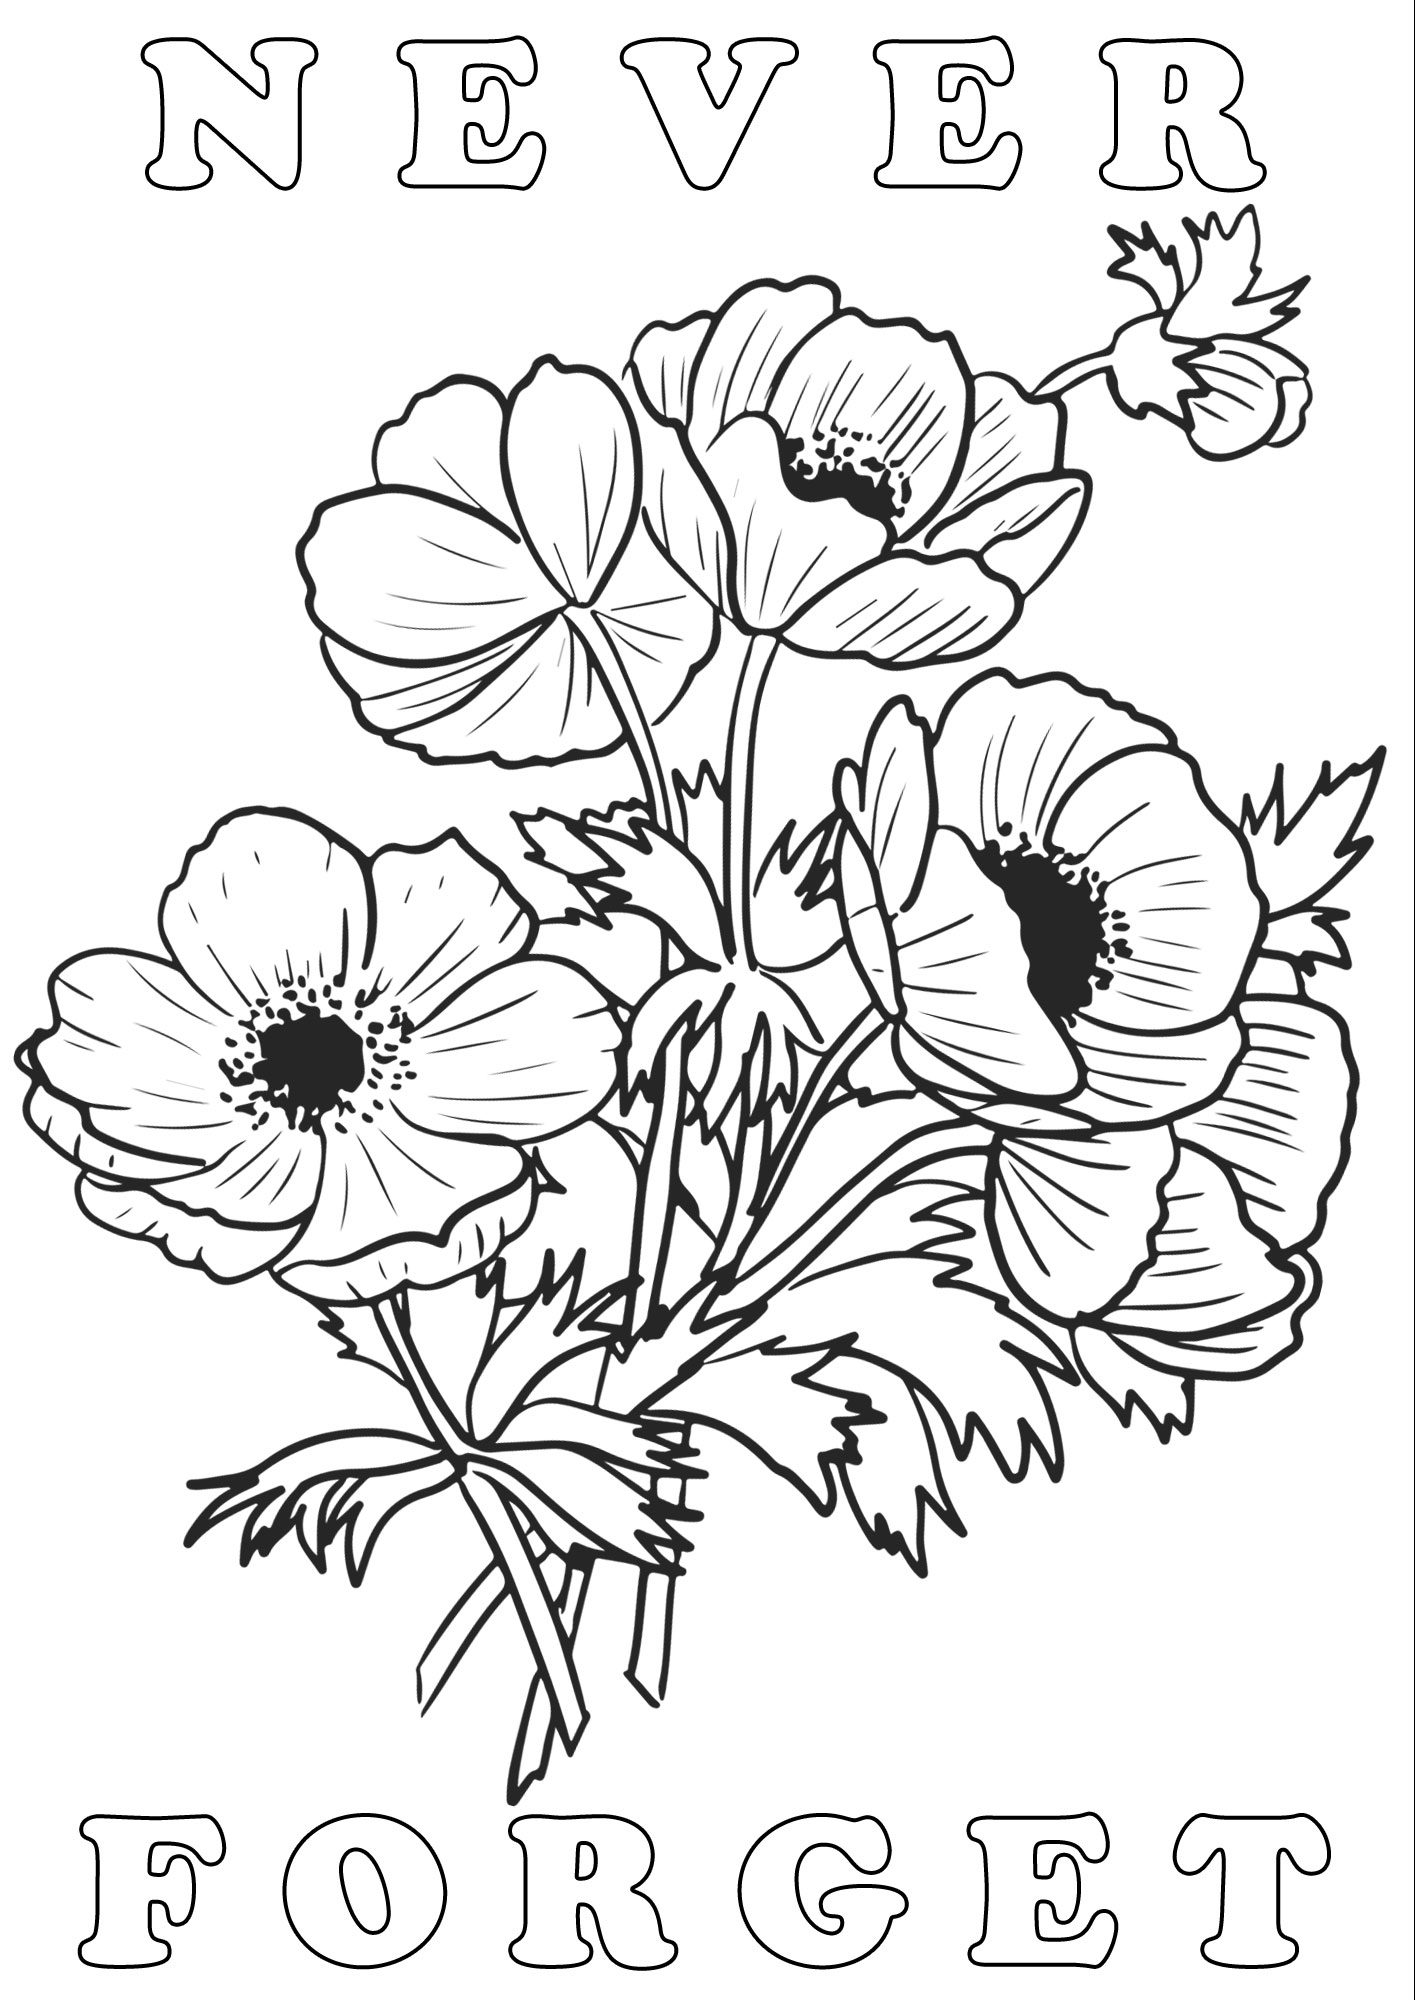 Poppies Colouring Poster: Never Forget | Rooftop Post Printables